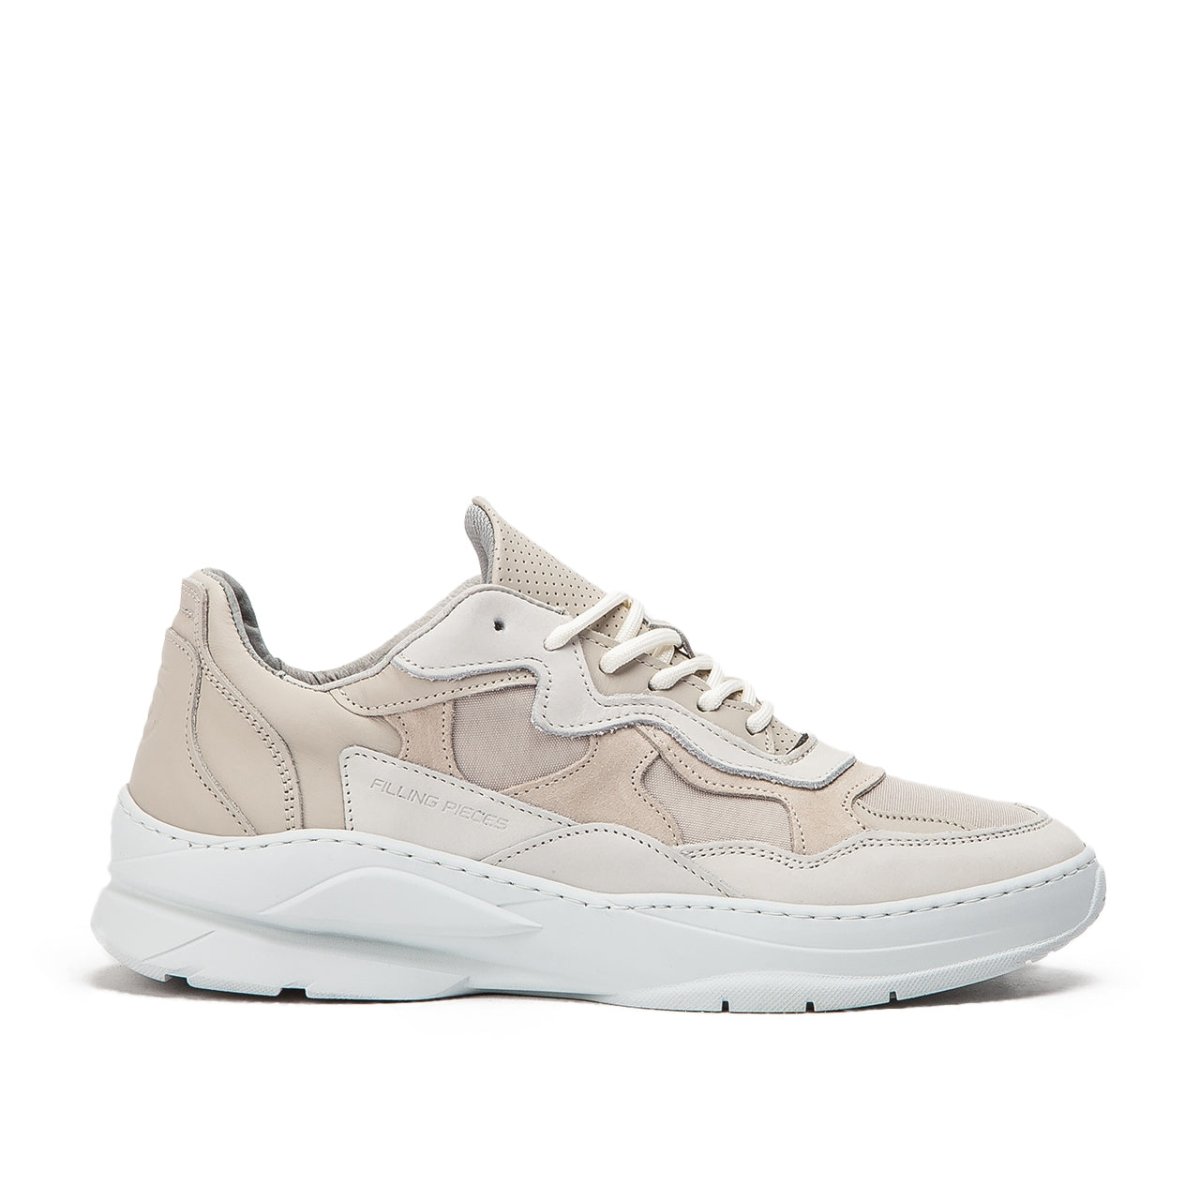 Filling Pieces Low Fade Cosmo Infinity (Weiß)  - Allike Store